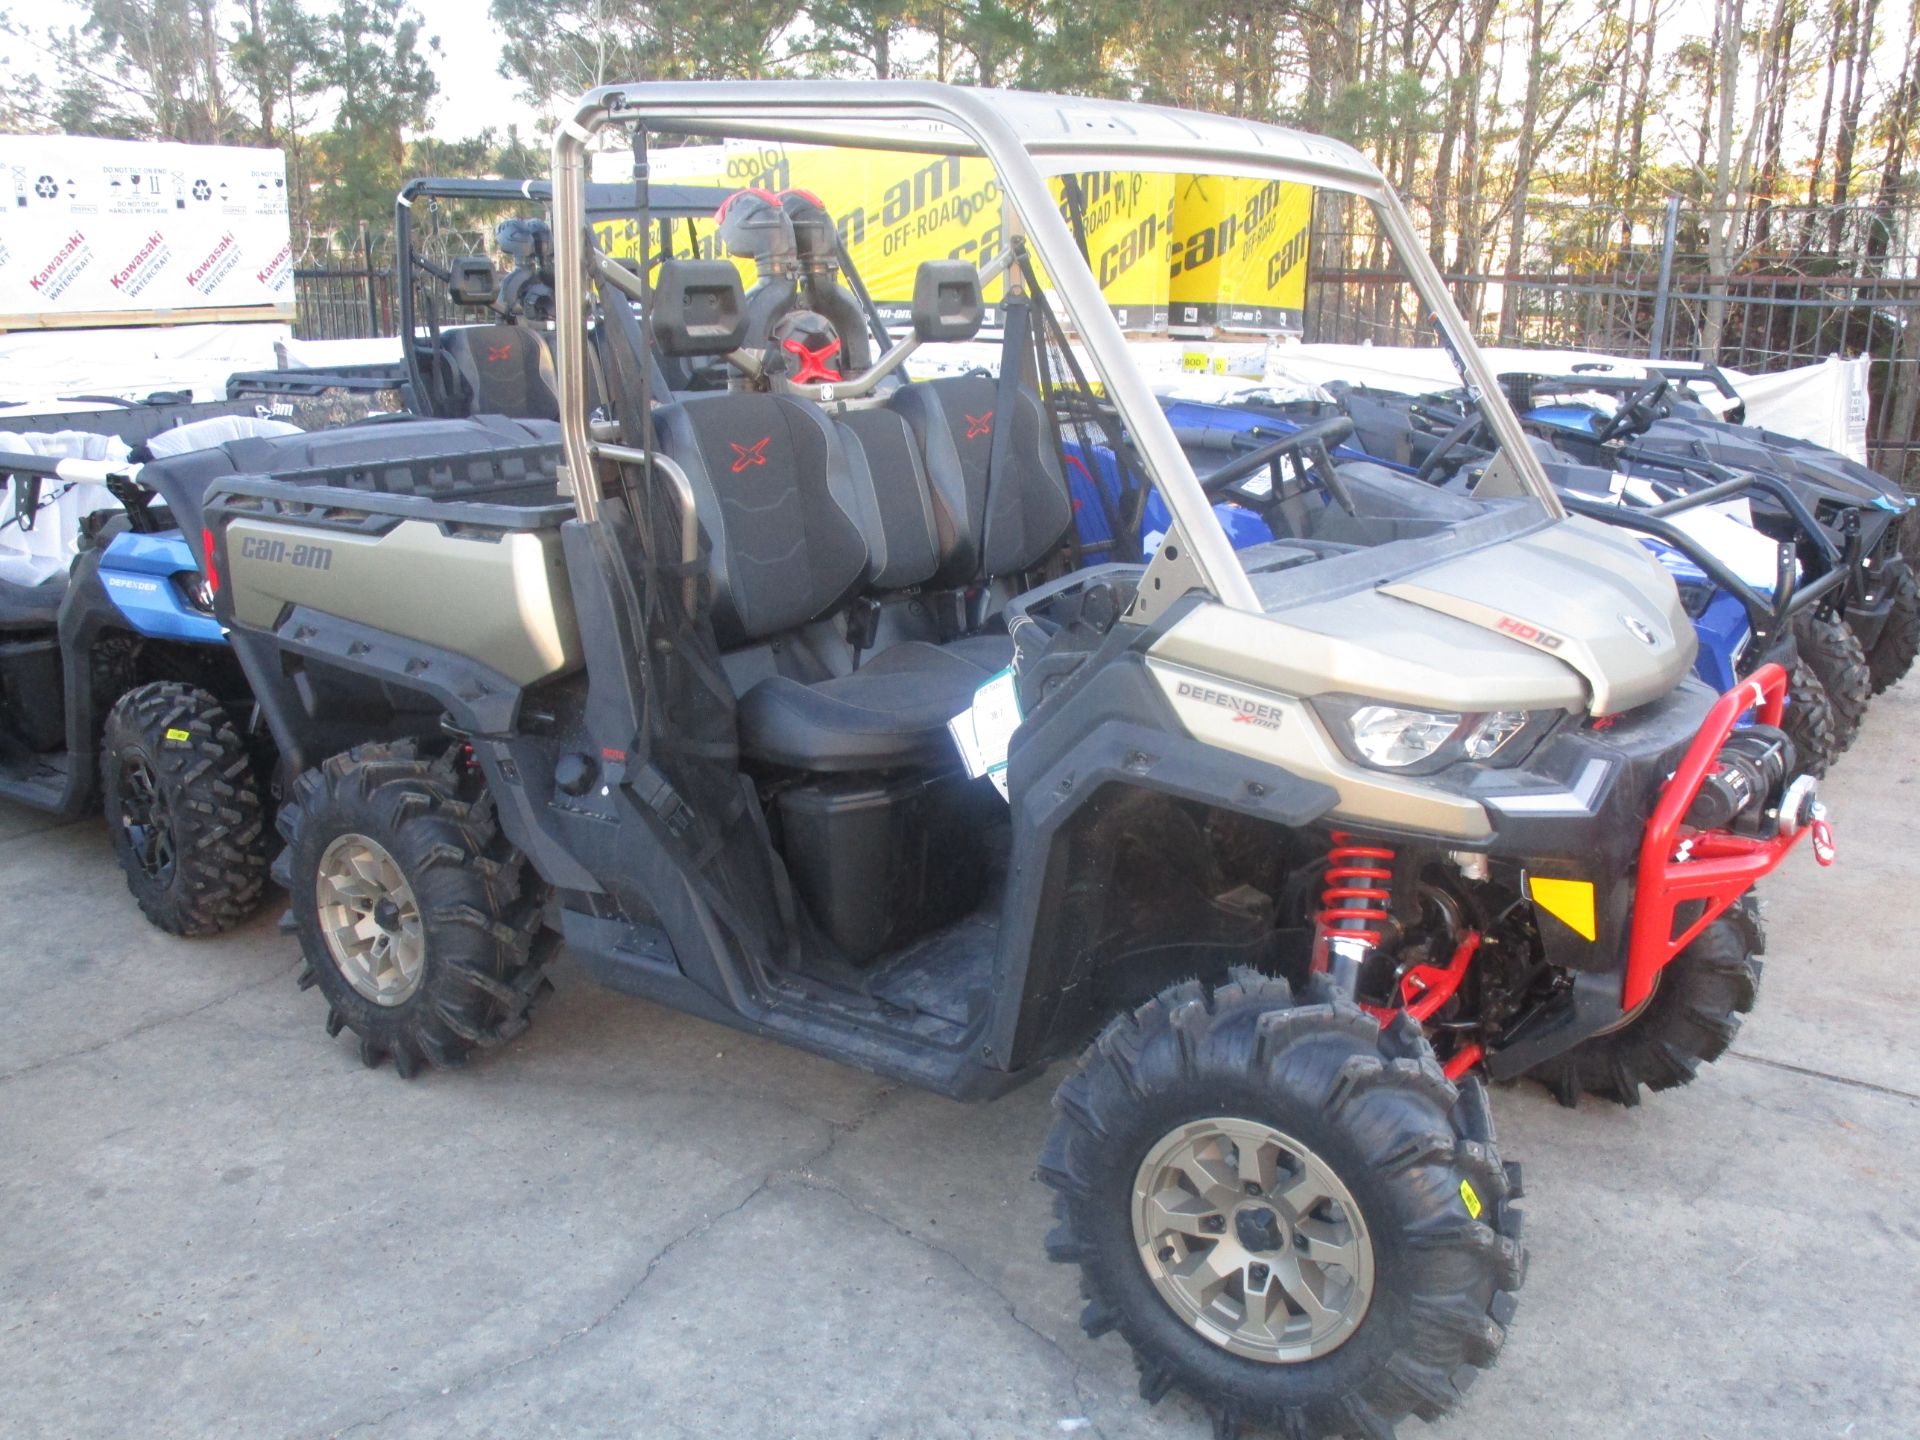 2022 Can-Am Defender X MR HD10 in Conroe, Texas - Photo 1